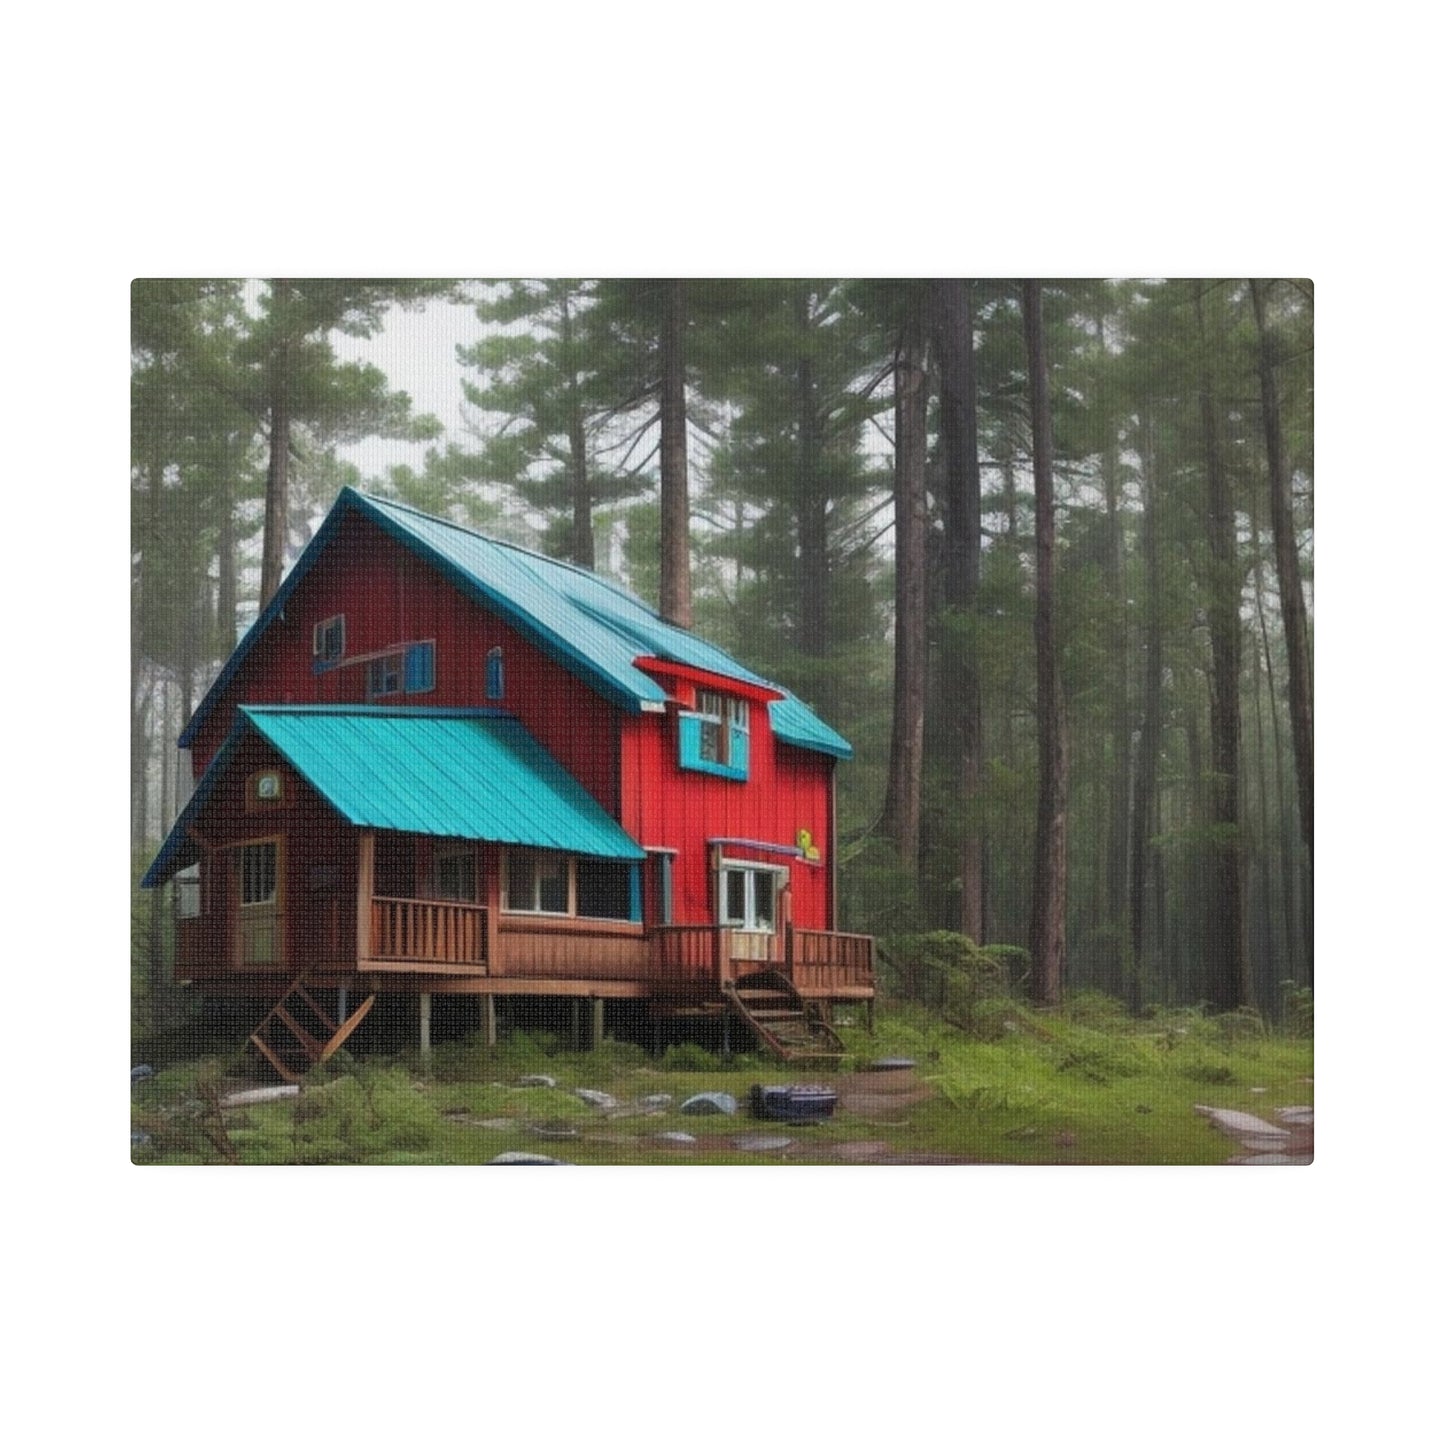 Lonely Cabin In Woods - Matte Canvas, Stretched, 0.75"